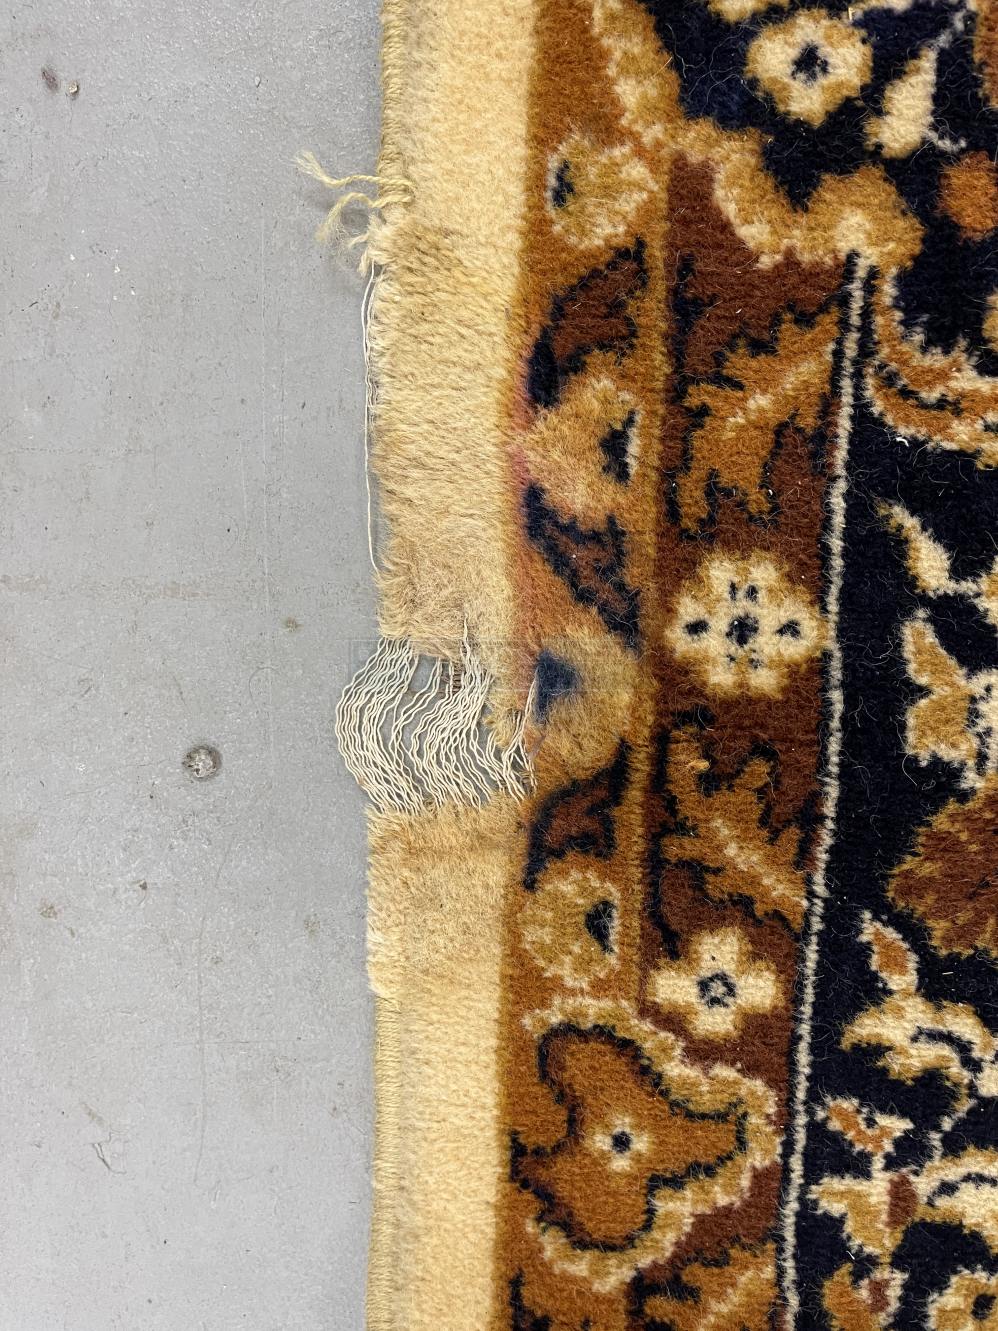 Carpets & Rugs: 20th cent. Carpet Iranian, Tehran, worsted wool, ivory ground, with large central - Image 2 of 2